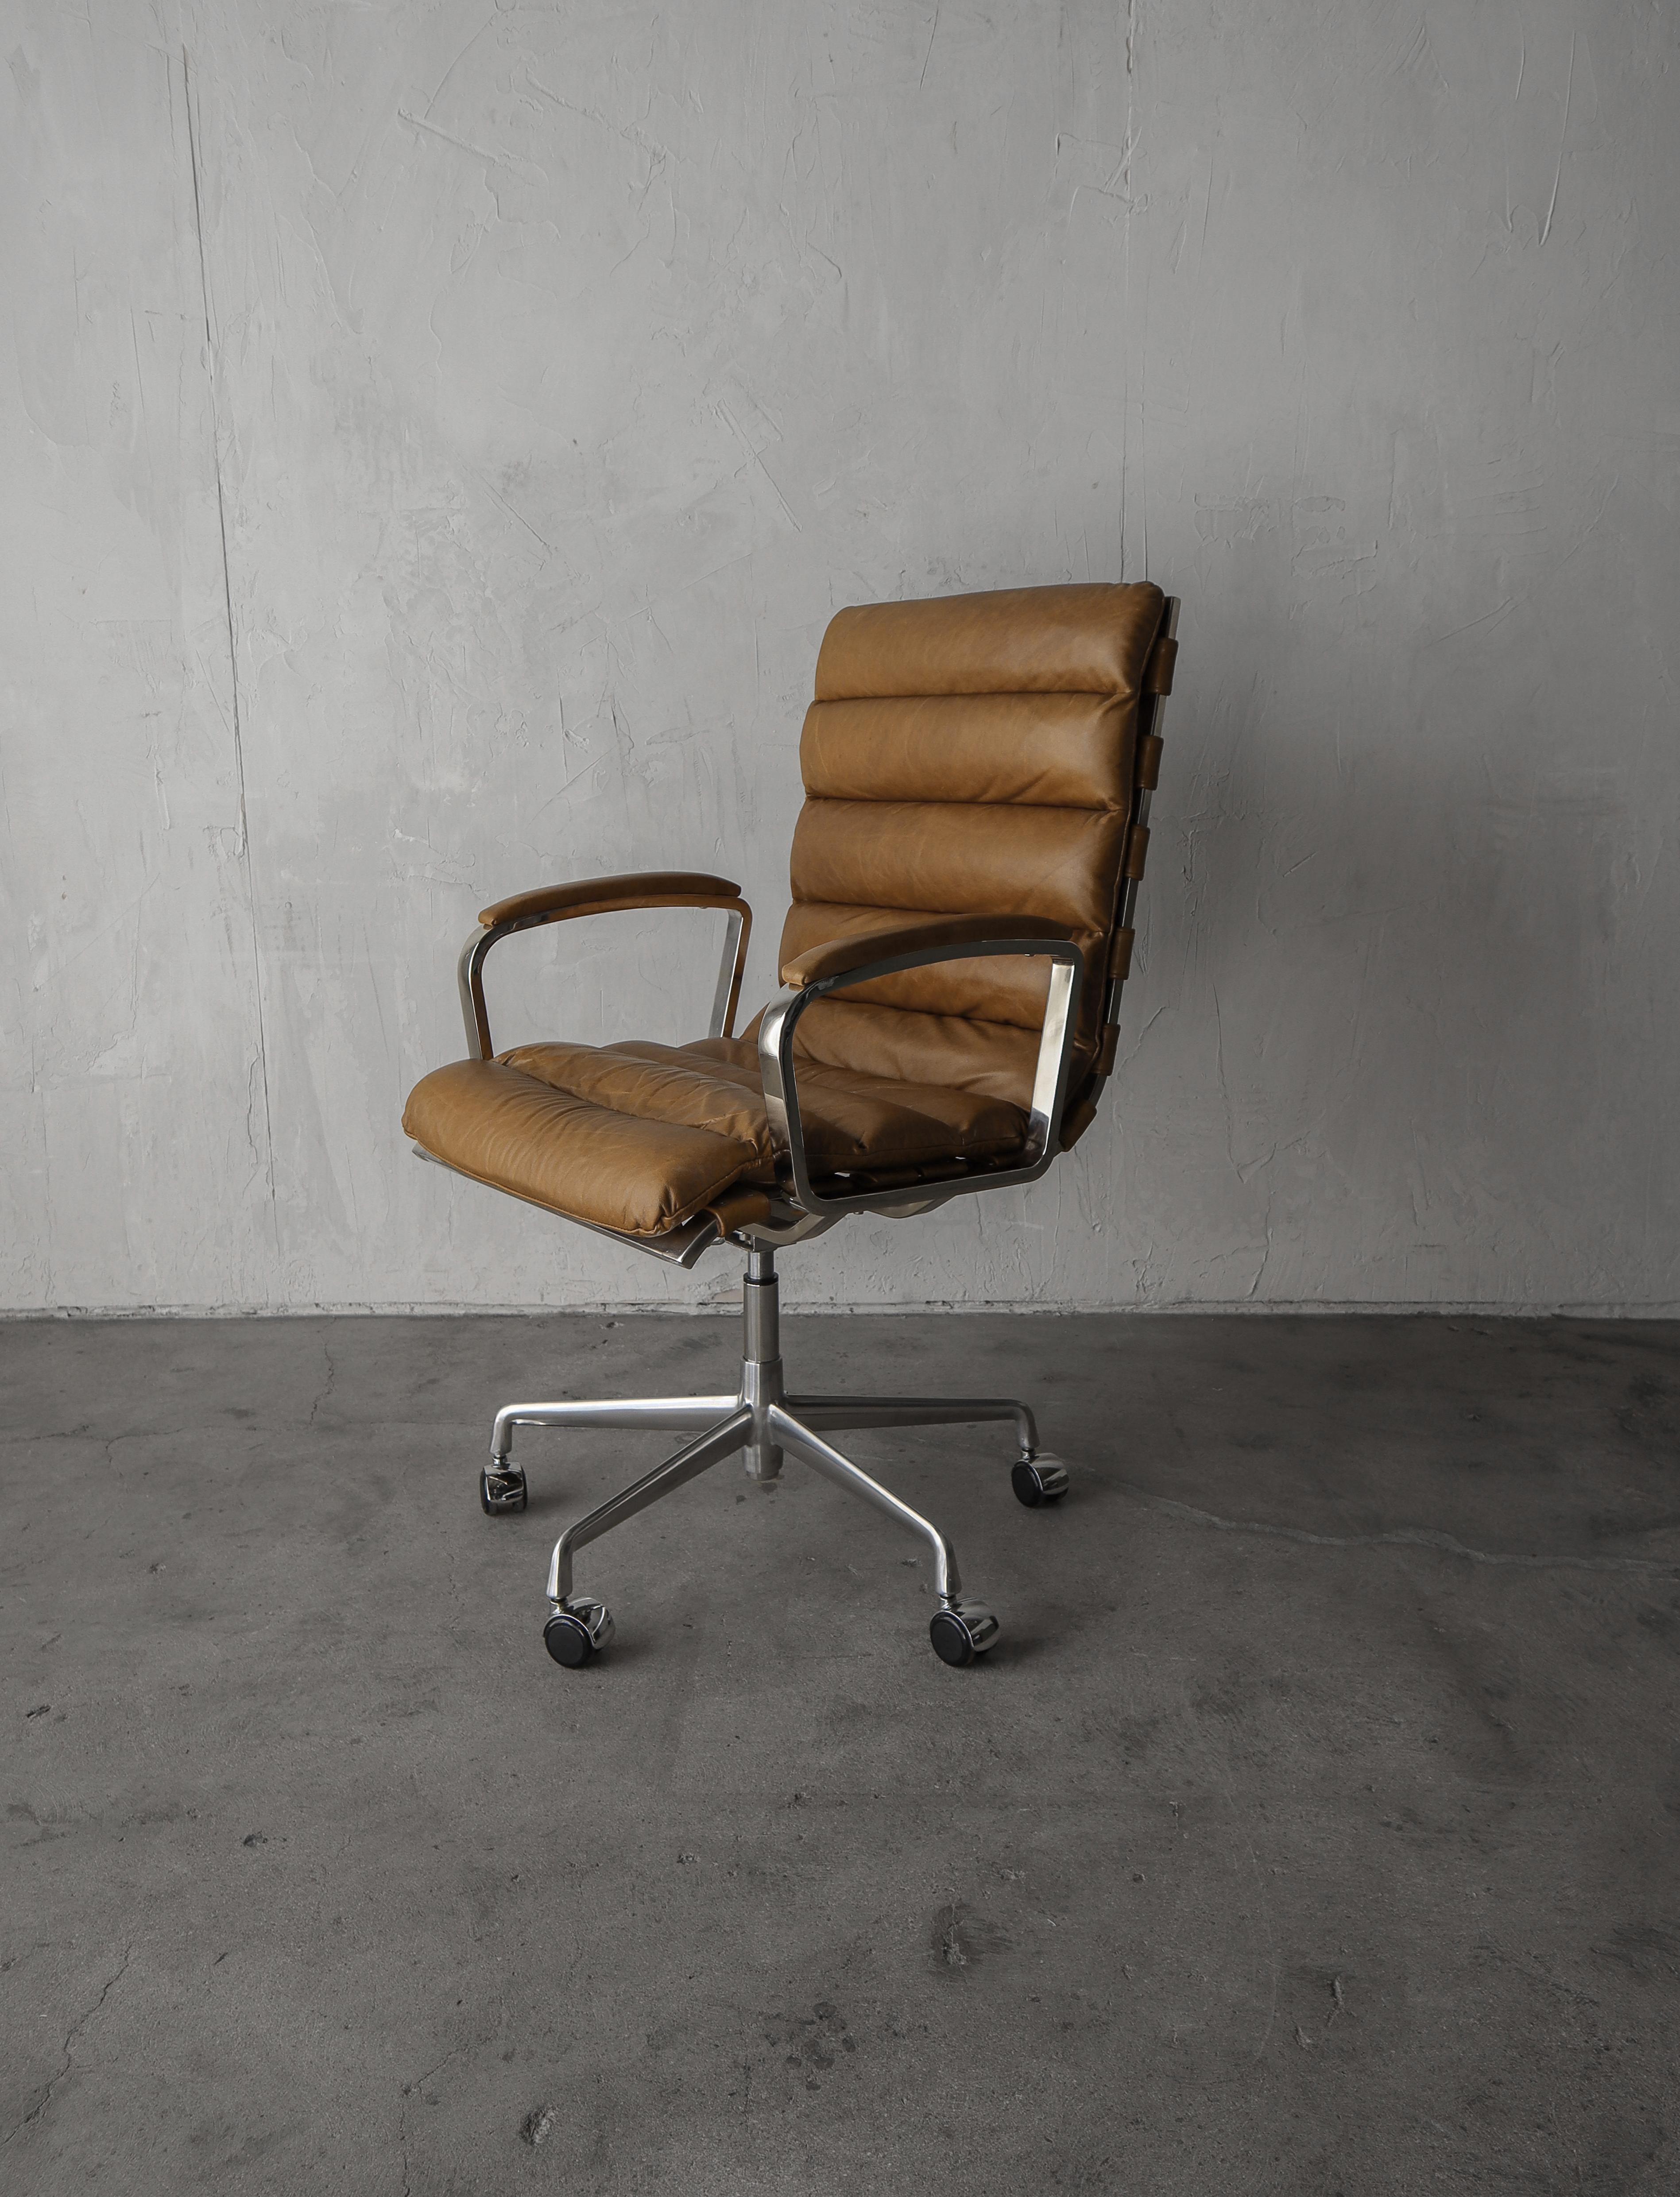 Classic Oviedo Desk Chair by Restoration Hardware

These gorgeous chairs pull their design from mid century classics.  The gorgeous channeled, perfectly patinated Berkshire leather seat and straps, bright chrome, fully height adjustable (seat height